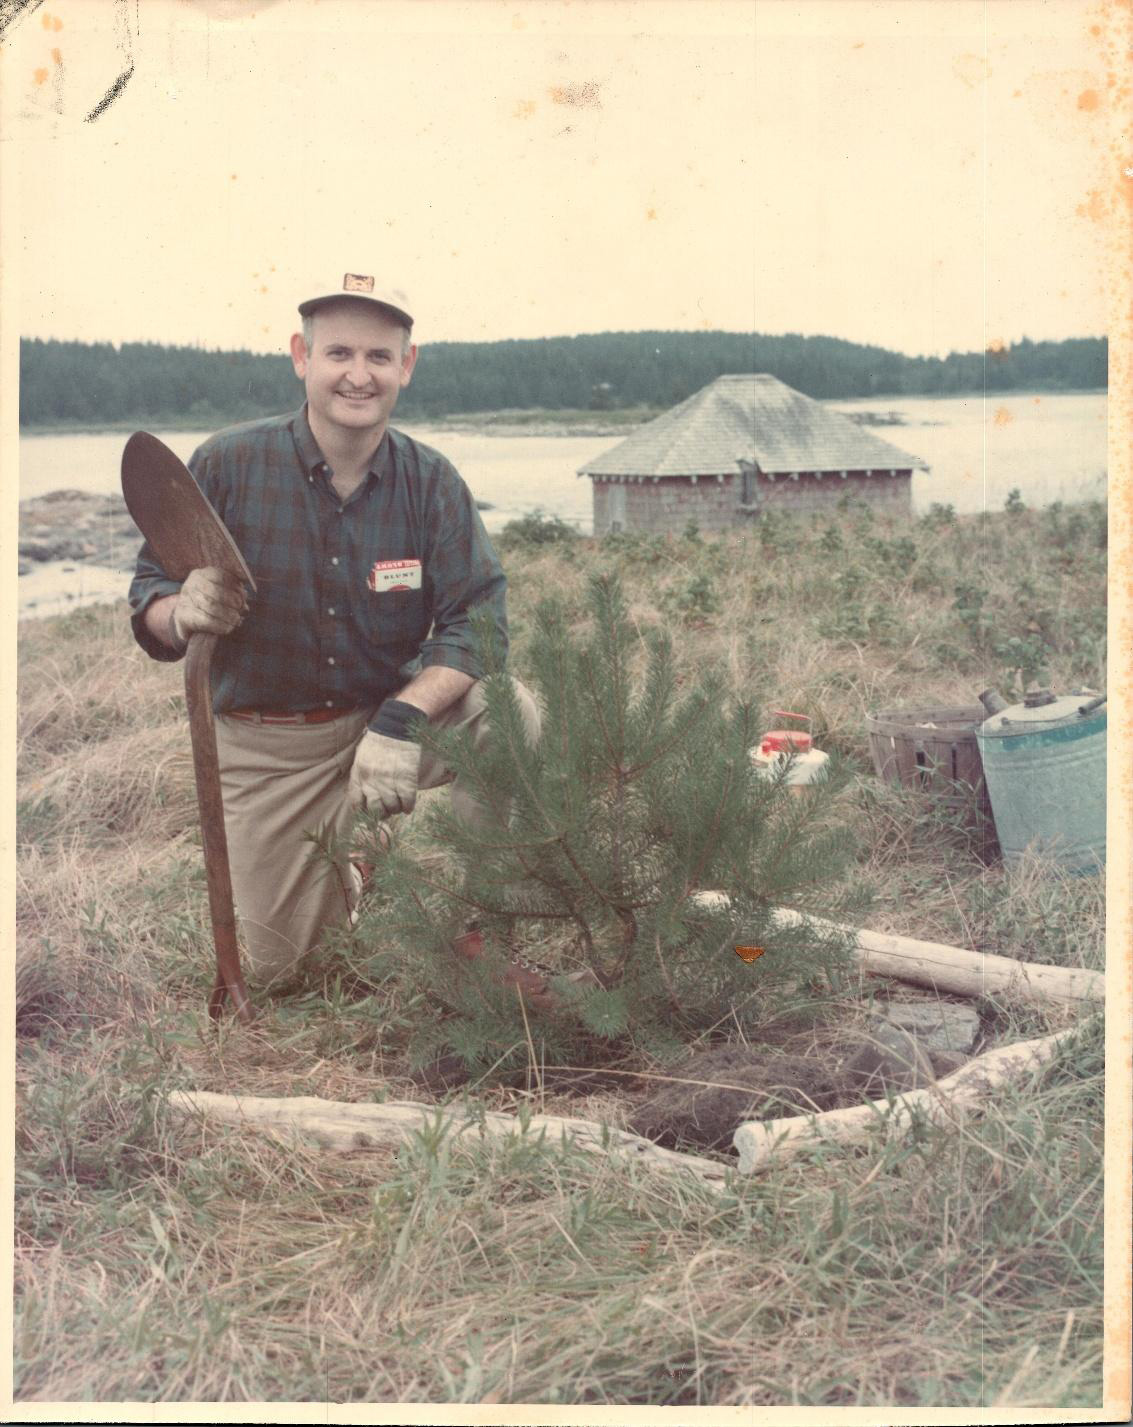 James Arey planting trees to reclaim de-forested land in 1970's.